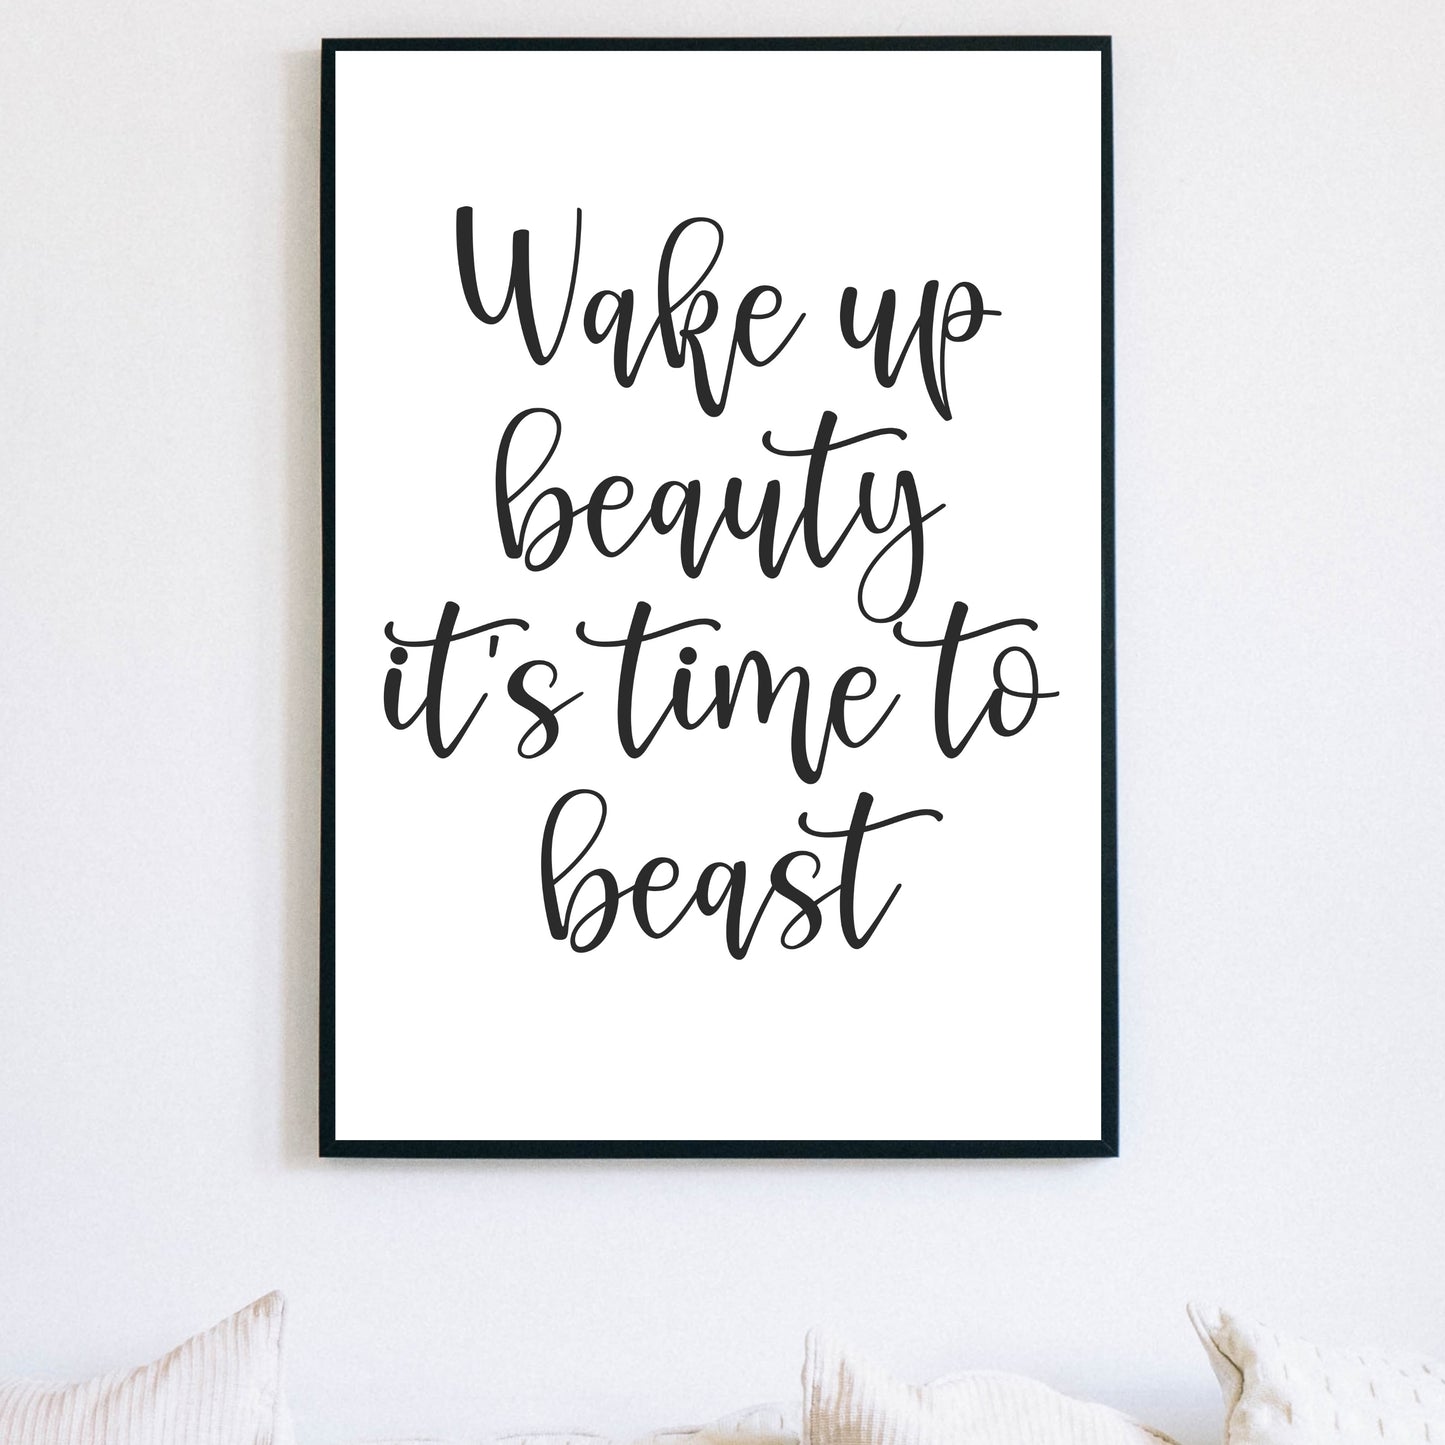 "Wake Up Beauty It's Time To Beast" Girl Quotes, Printable Art